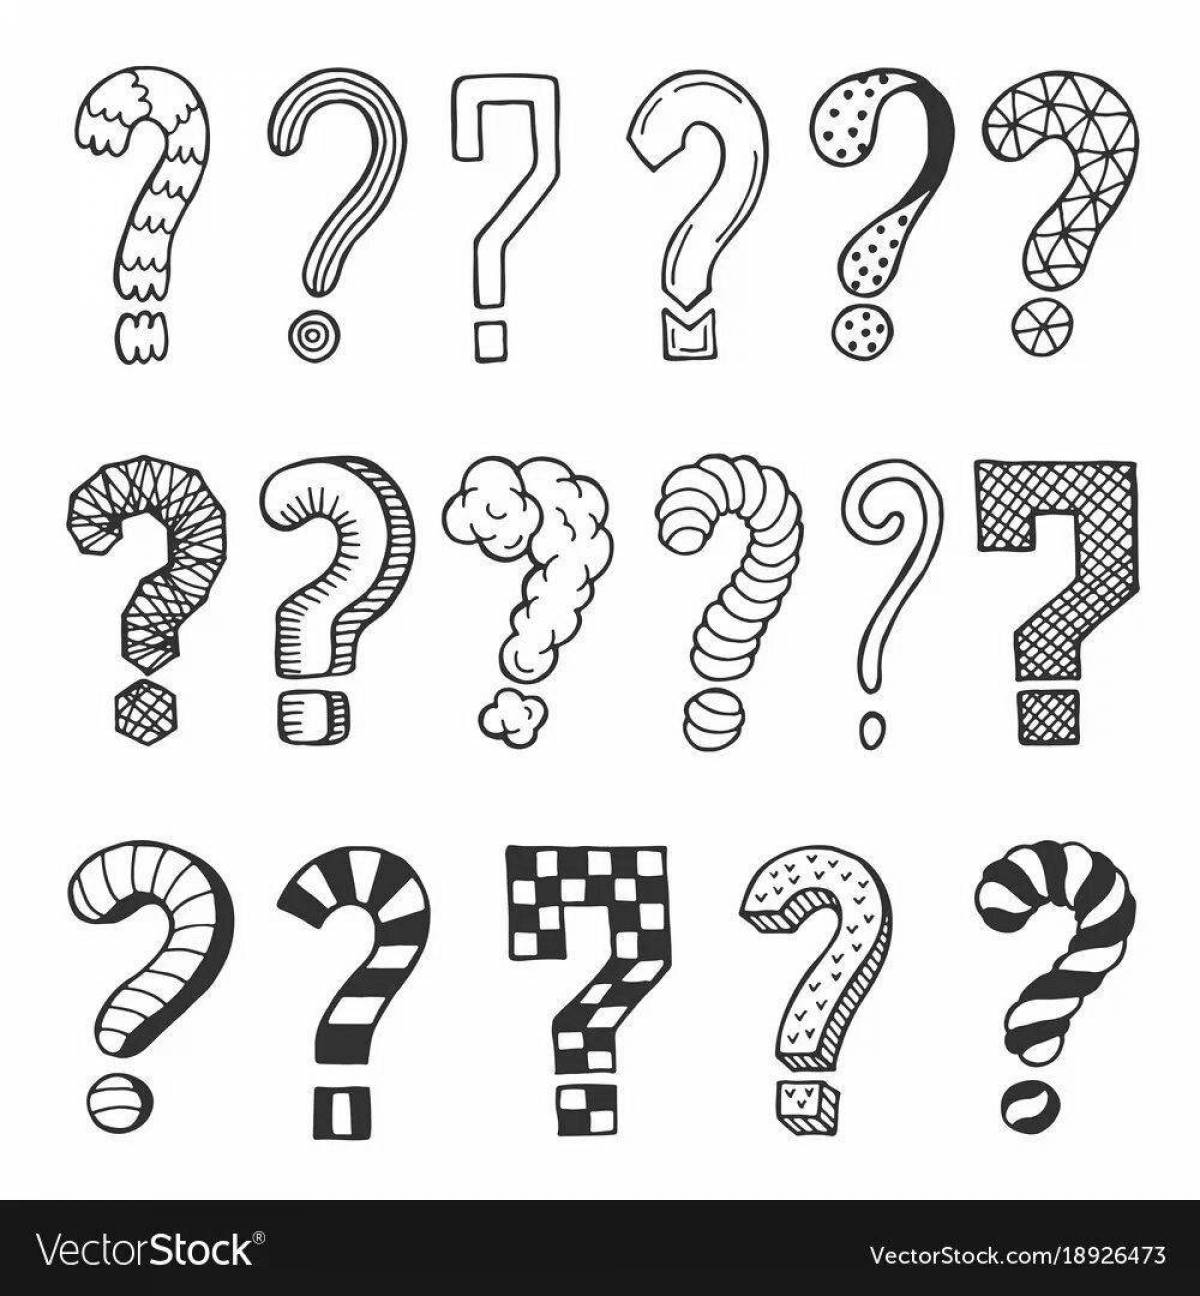 Coloring page with intriguing question